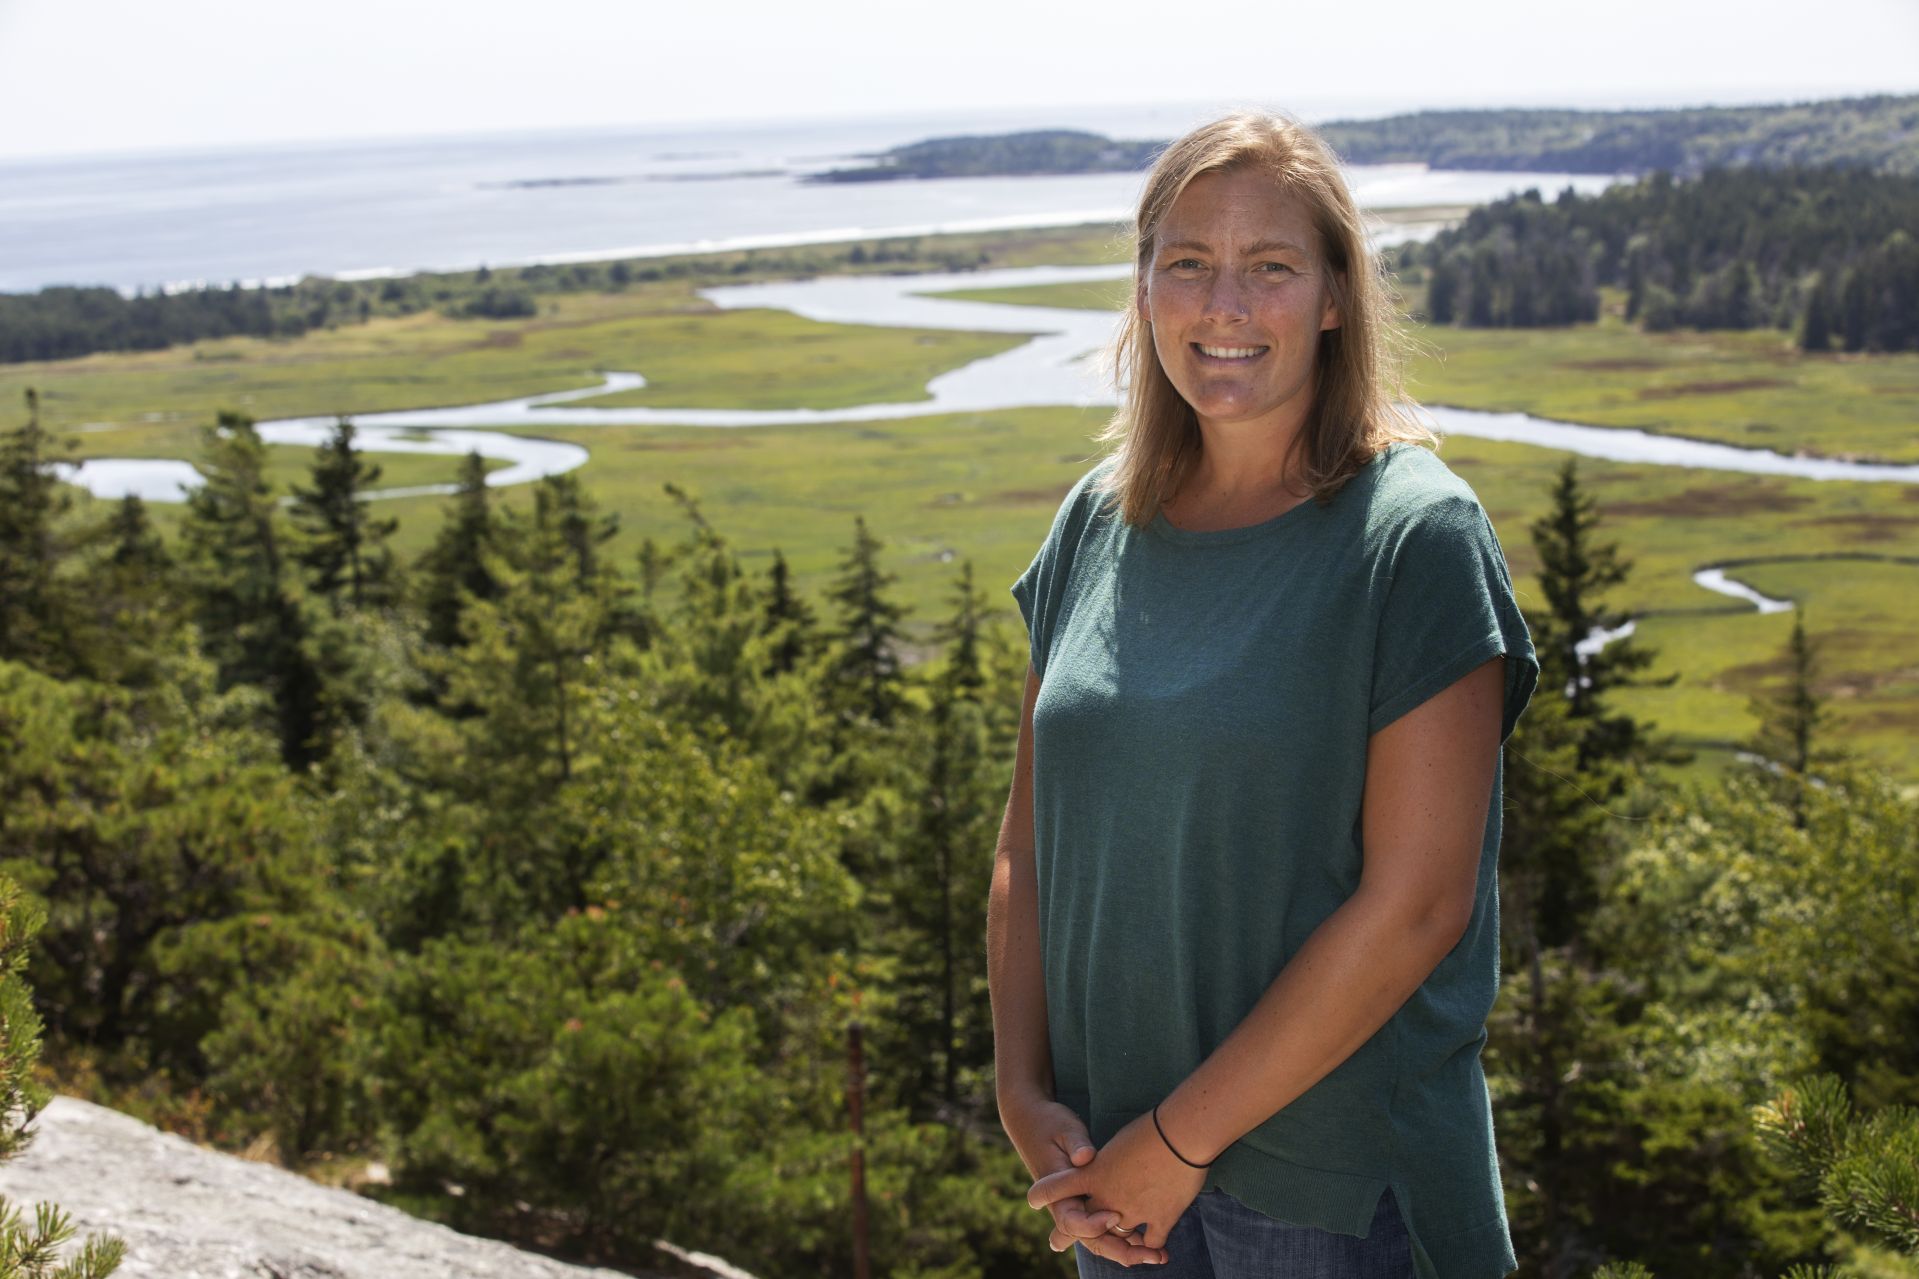 Caitlin Cleaver, director of Bates Morse Mountain Conservation Area & Shortridge Coastal Center poses for portraits at Bates Morse Mountain on August 15, 2019.